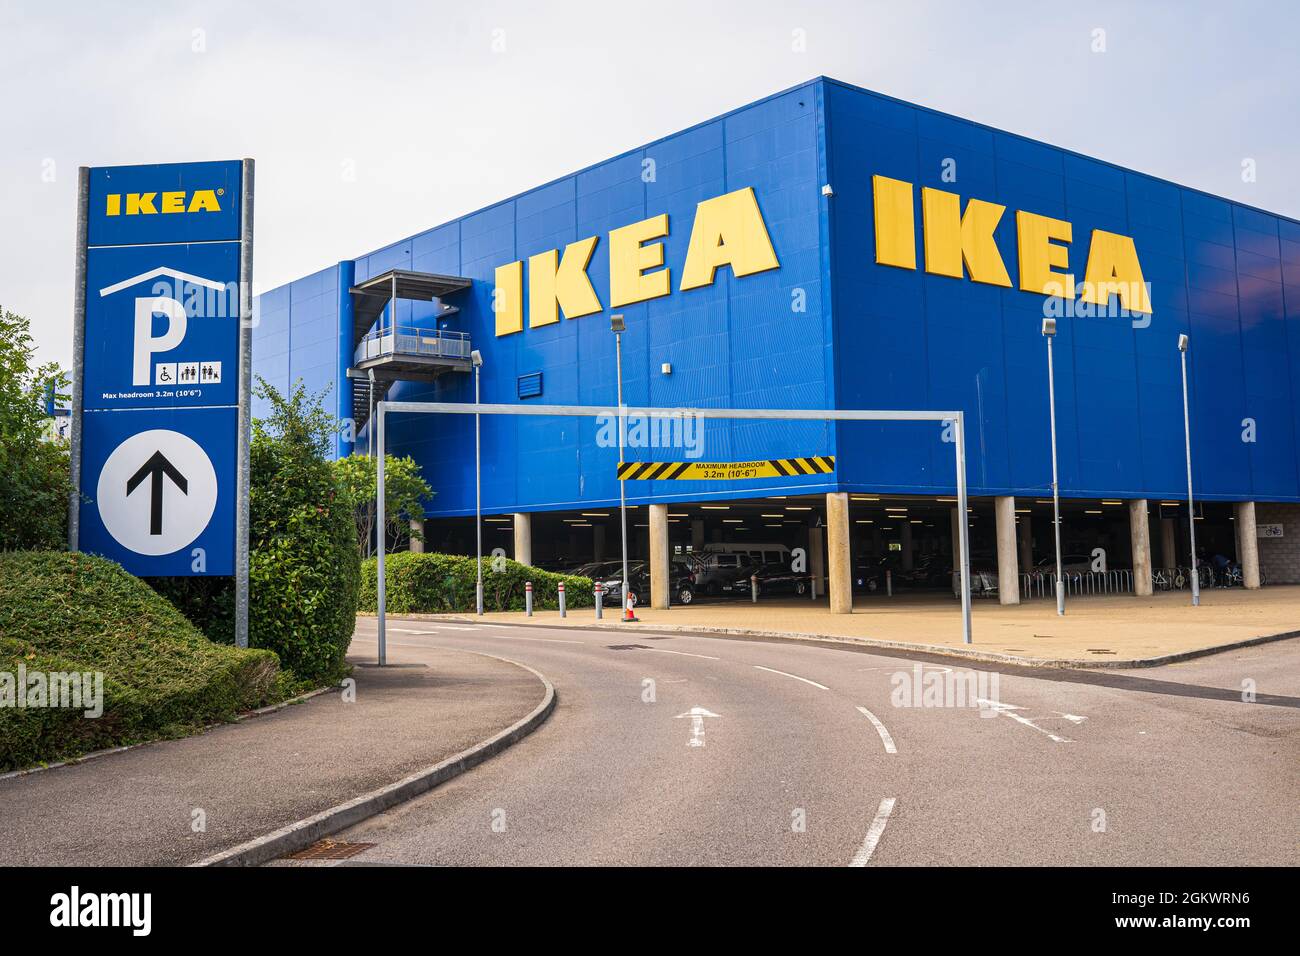 IKEA home furnishings store building exterior, blue facade with yellow sign  logo. Cardiff, Wales, the United Kingdom - September 13, 2021 Stock Photo -  Alamy